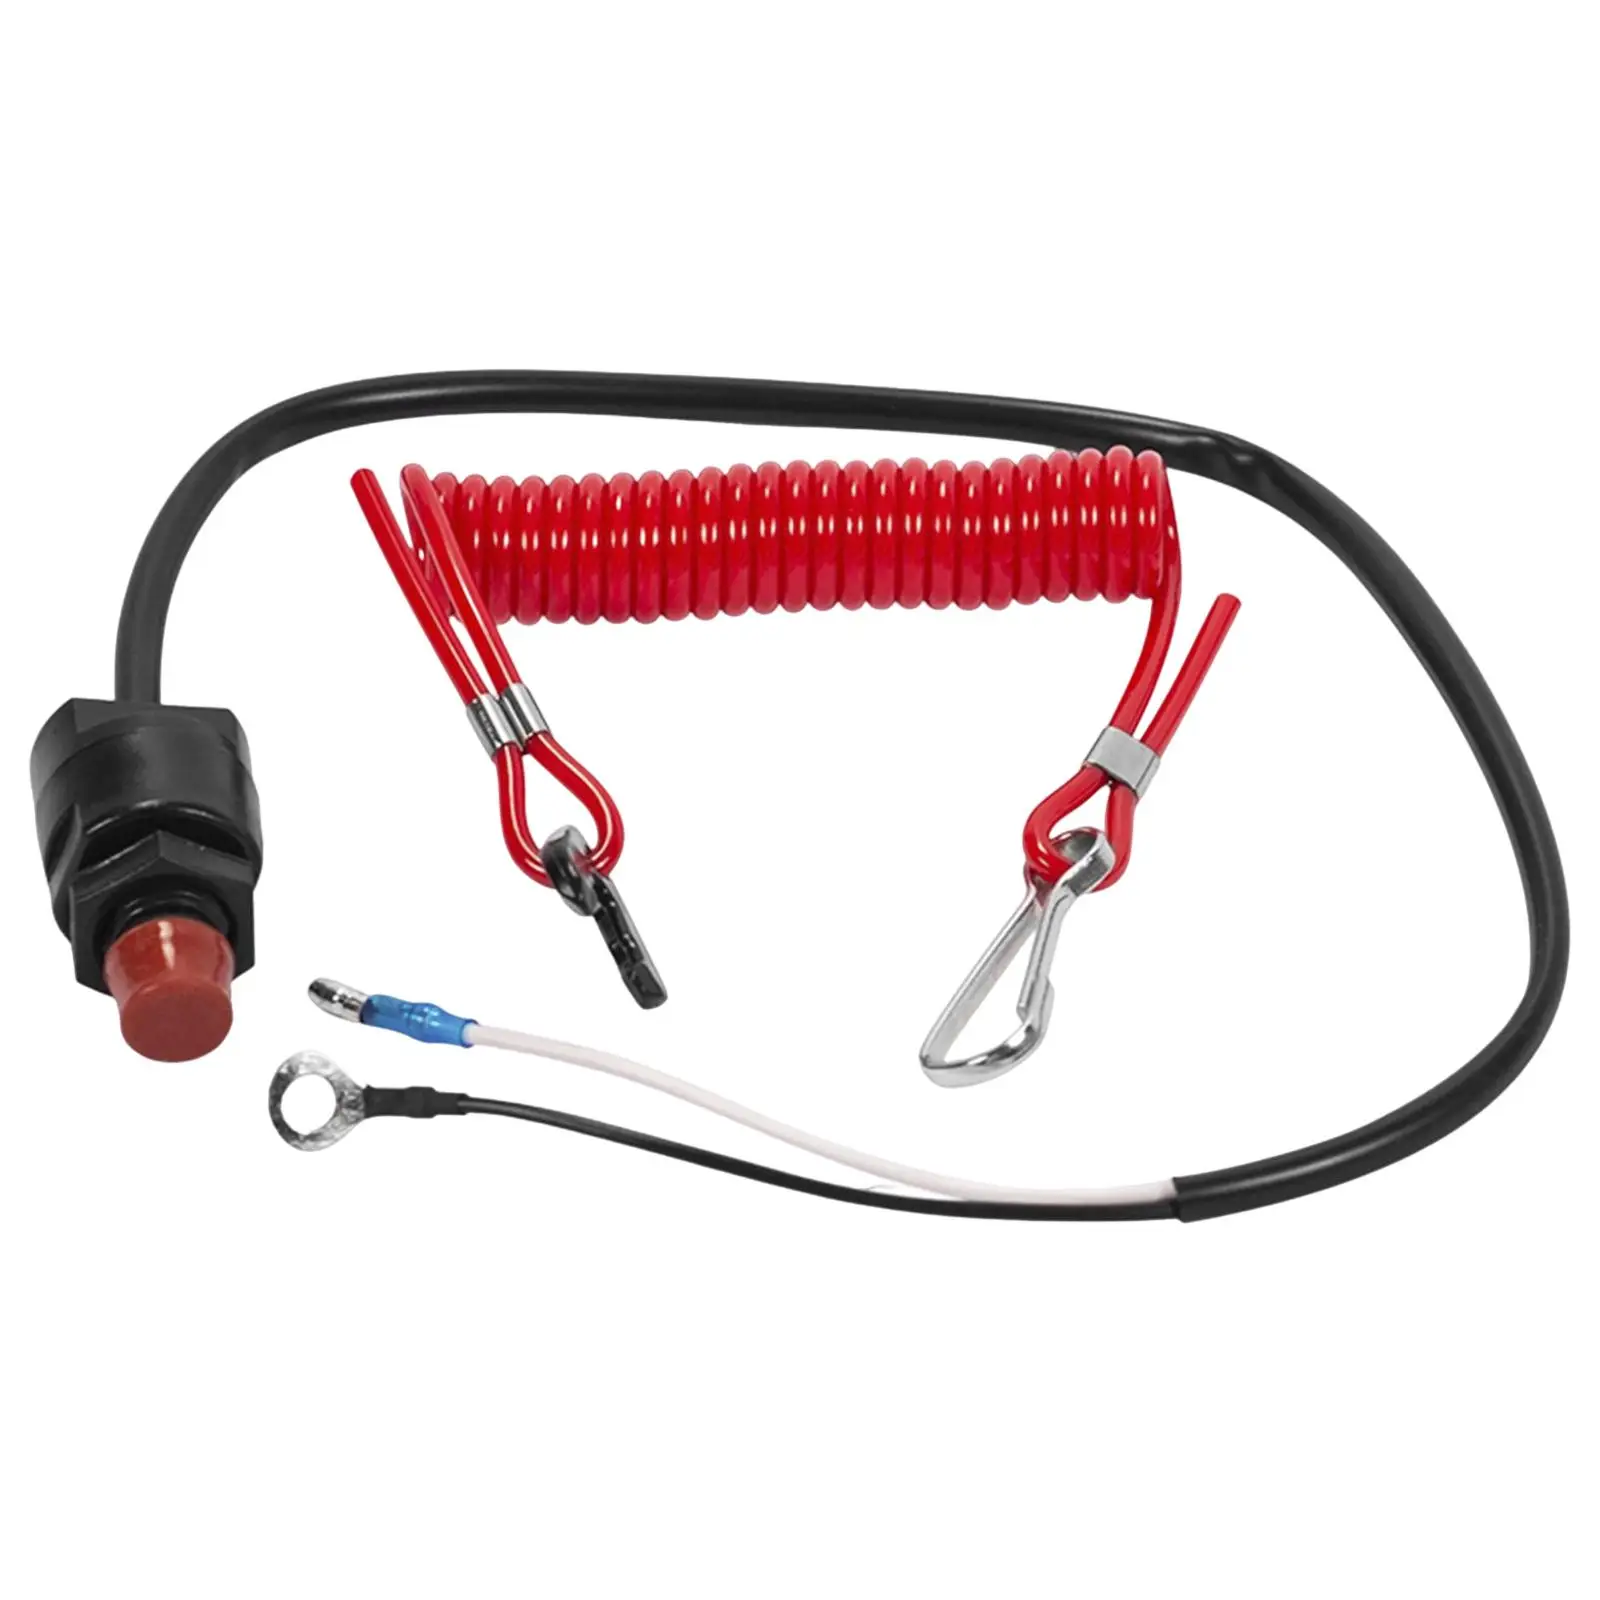 Flameout Switch Emergency Red Ignition Rope Cut Out for Boat Outboard